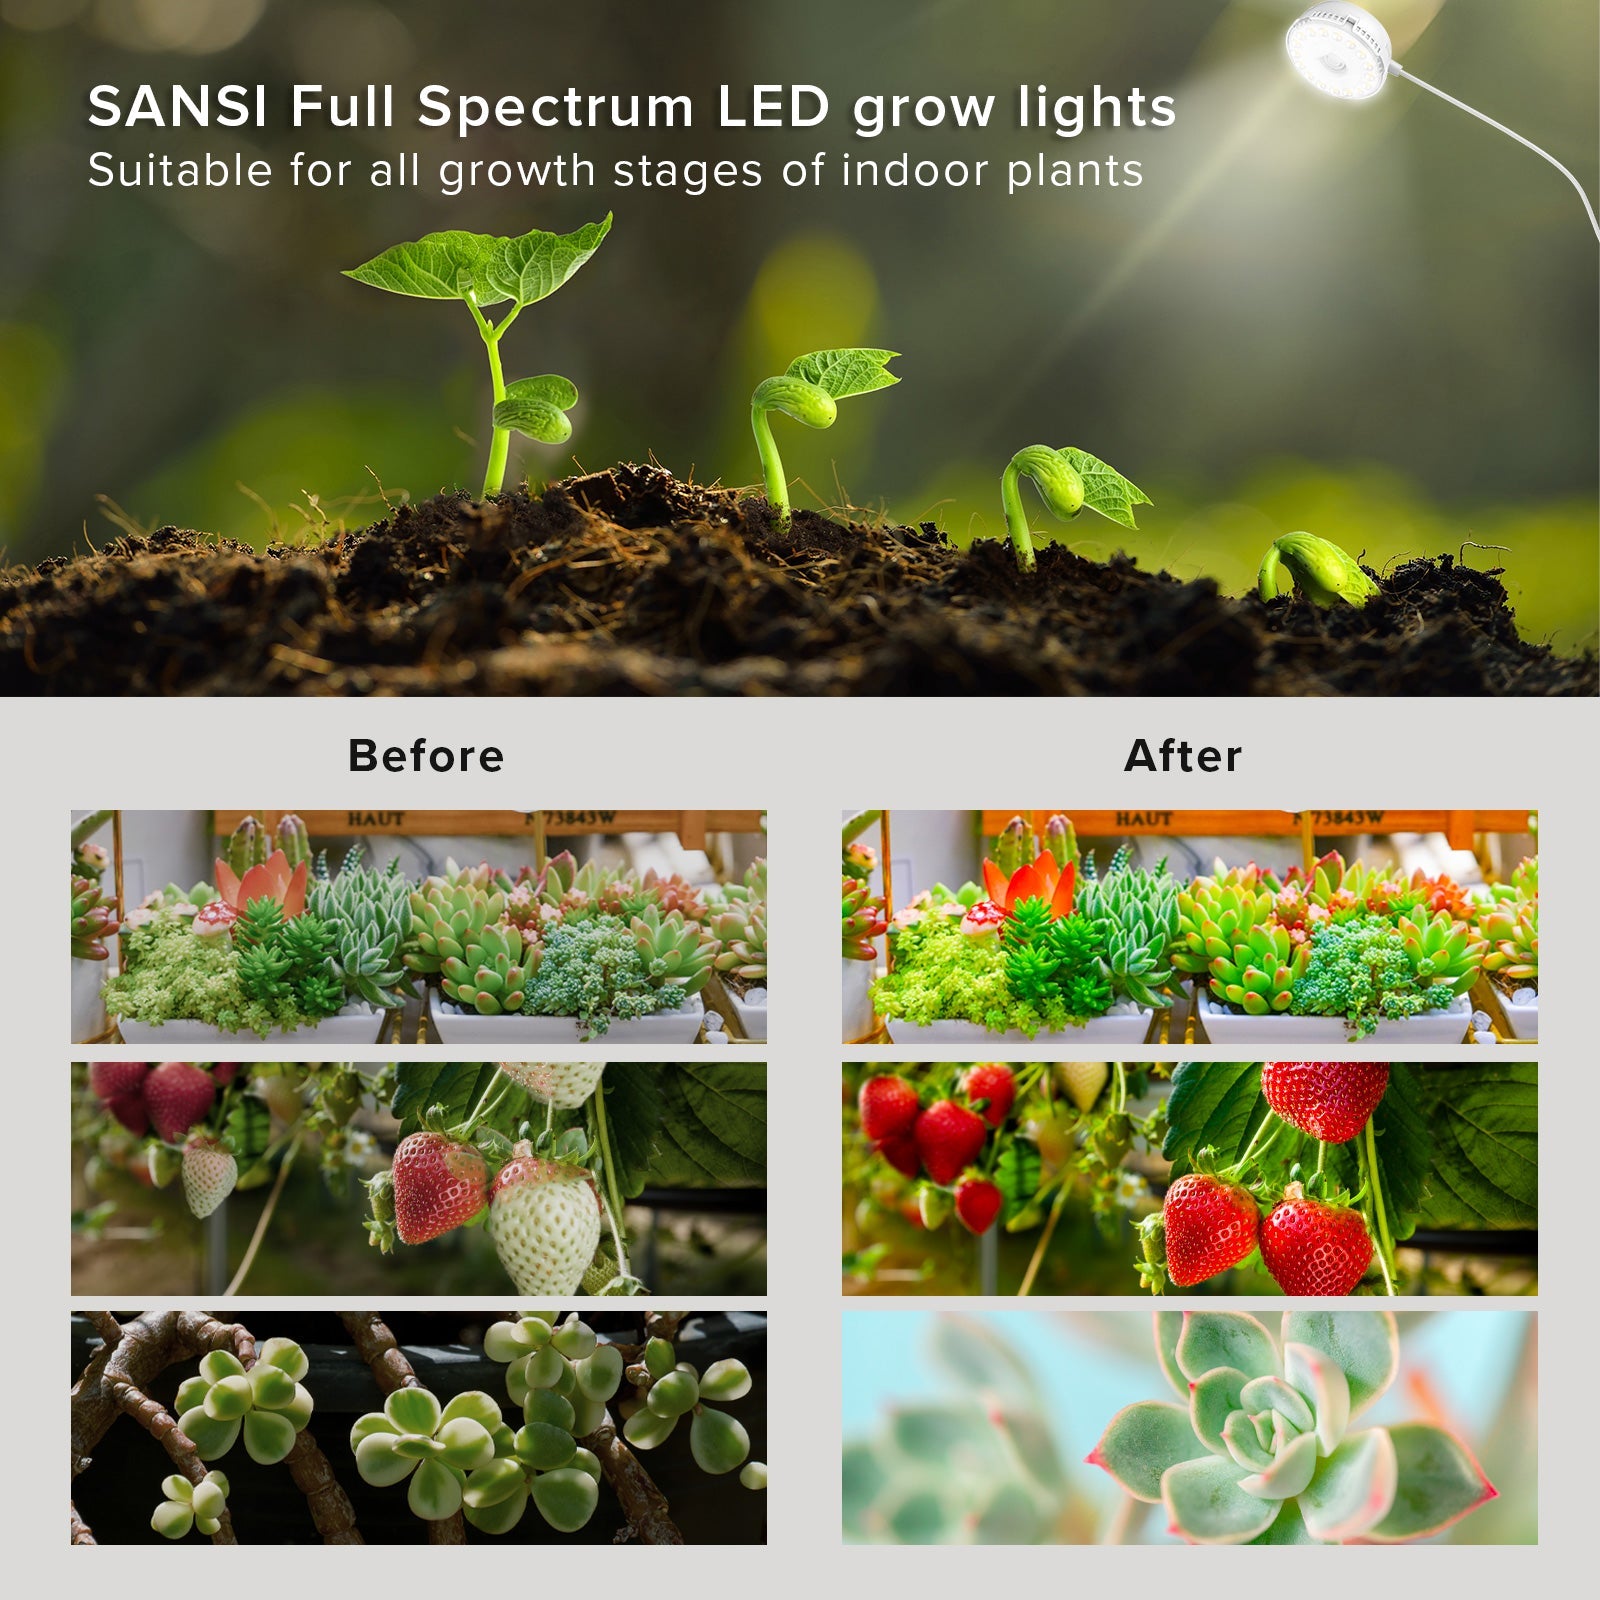 SANSI Full Spectrum LED grow lights are suitable for all growth stages of indoor plants.